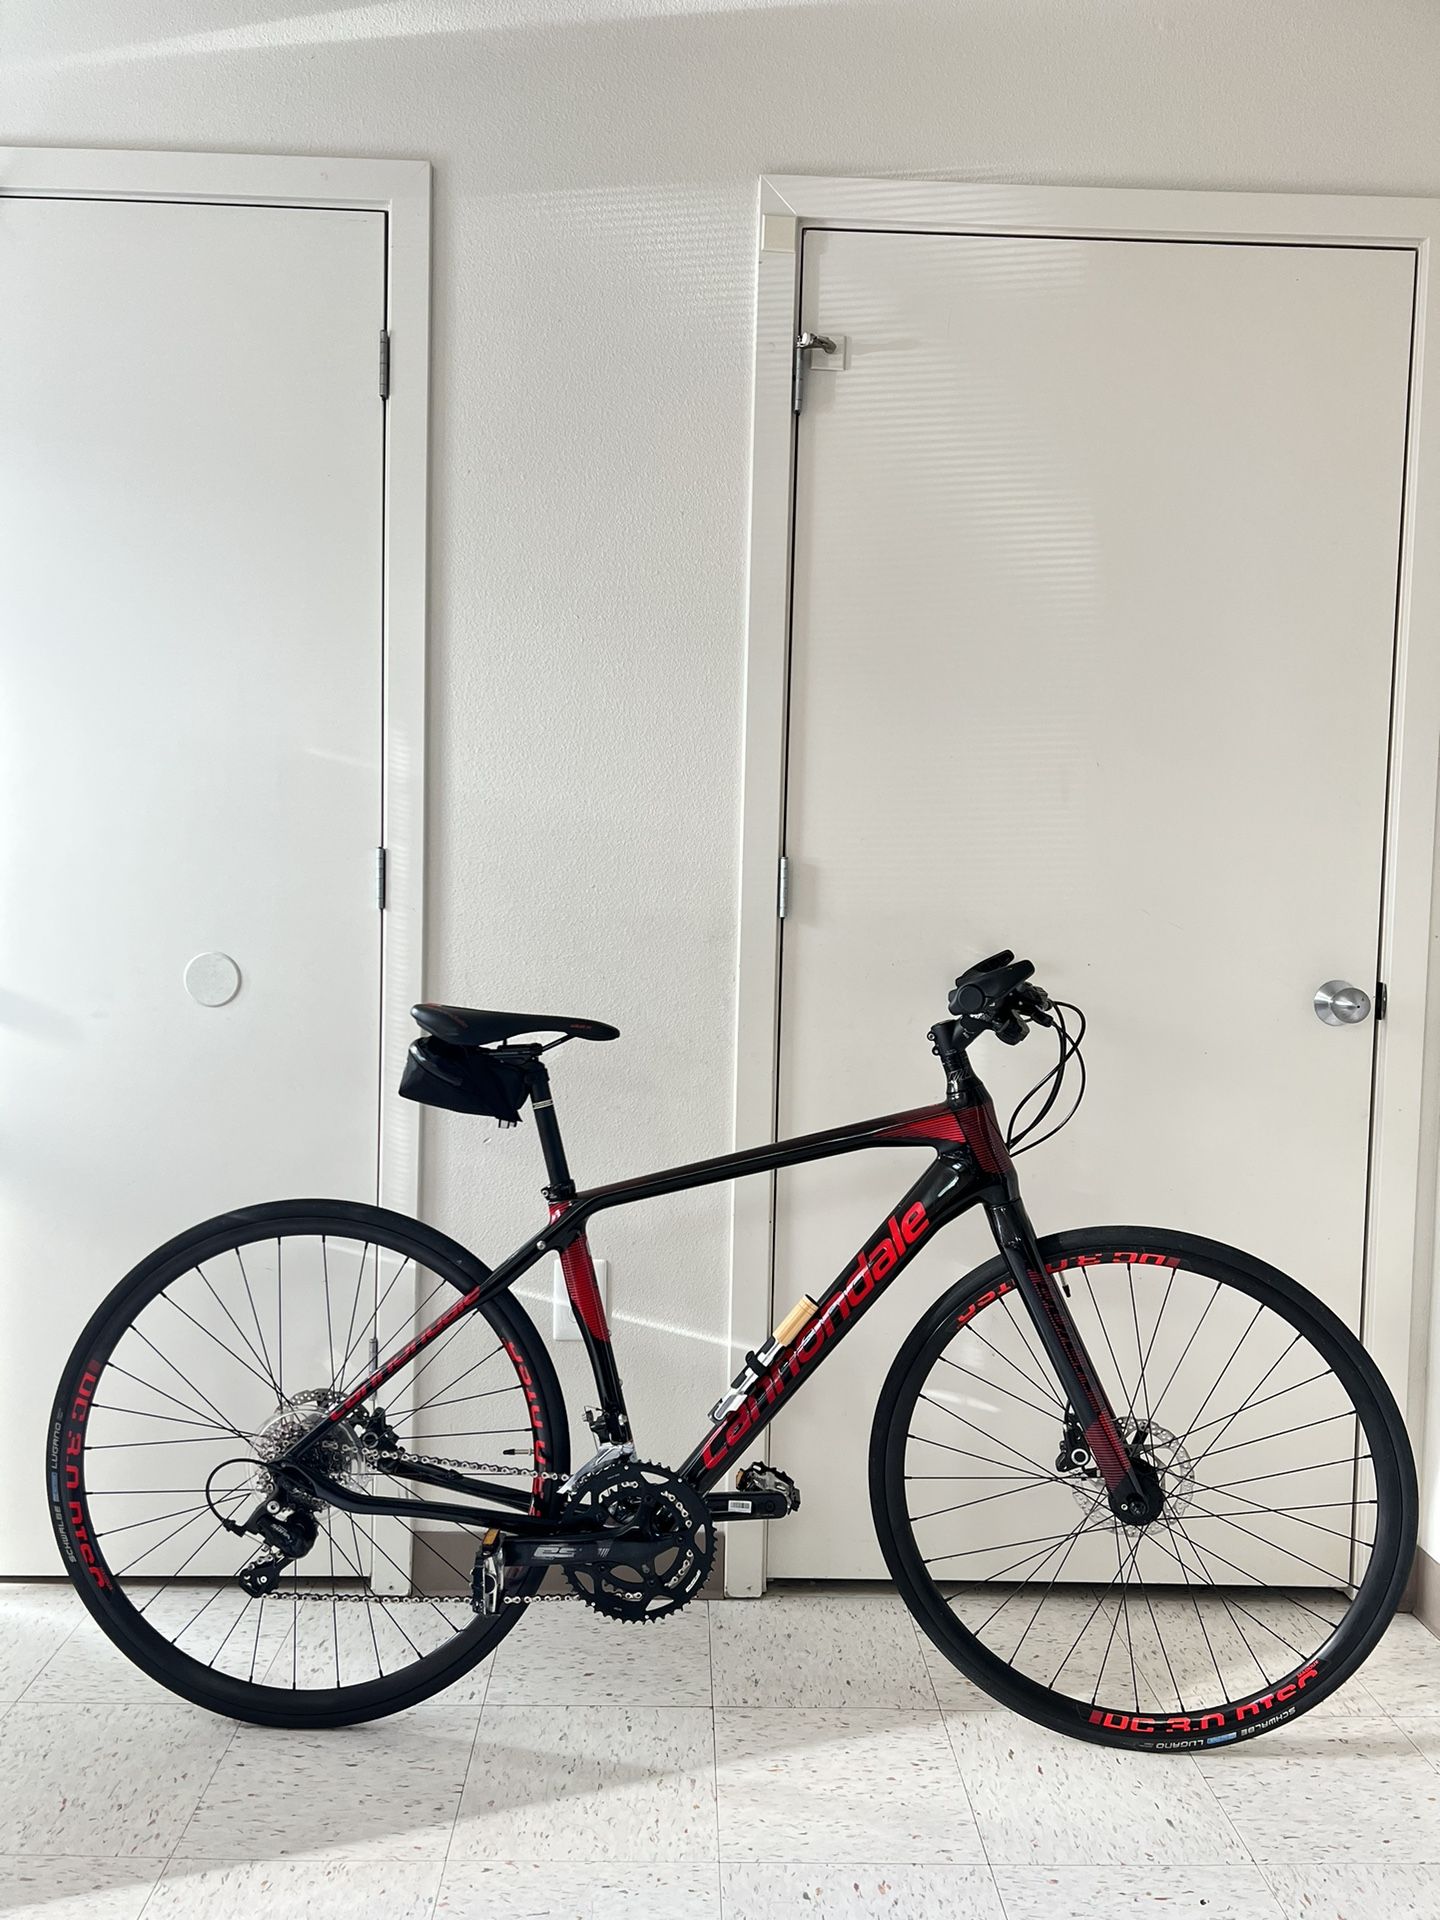  Cannondale Quick Save Hybrid Full Carbon Bike 